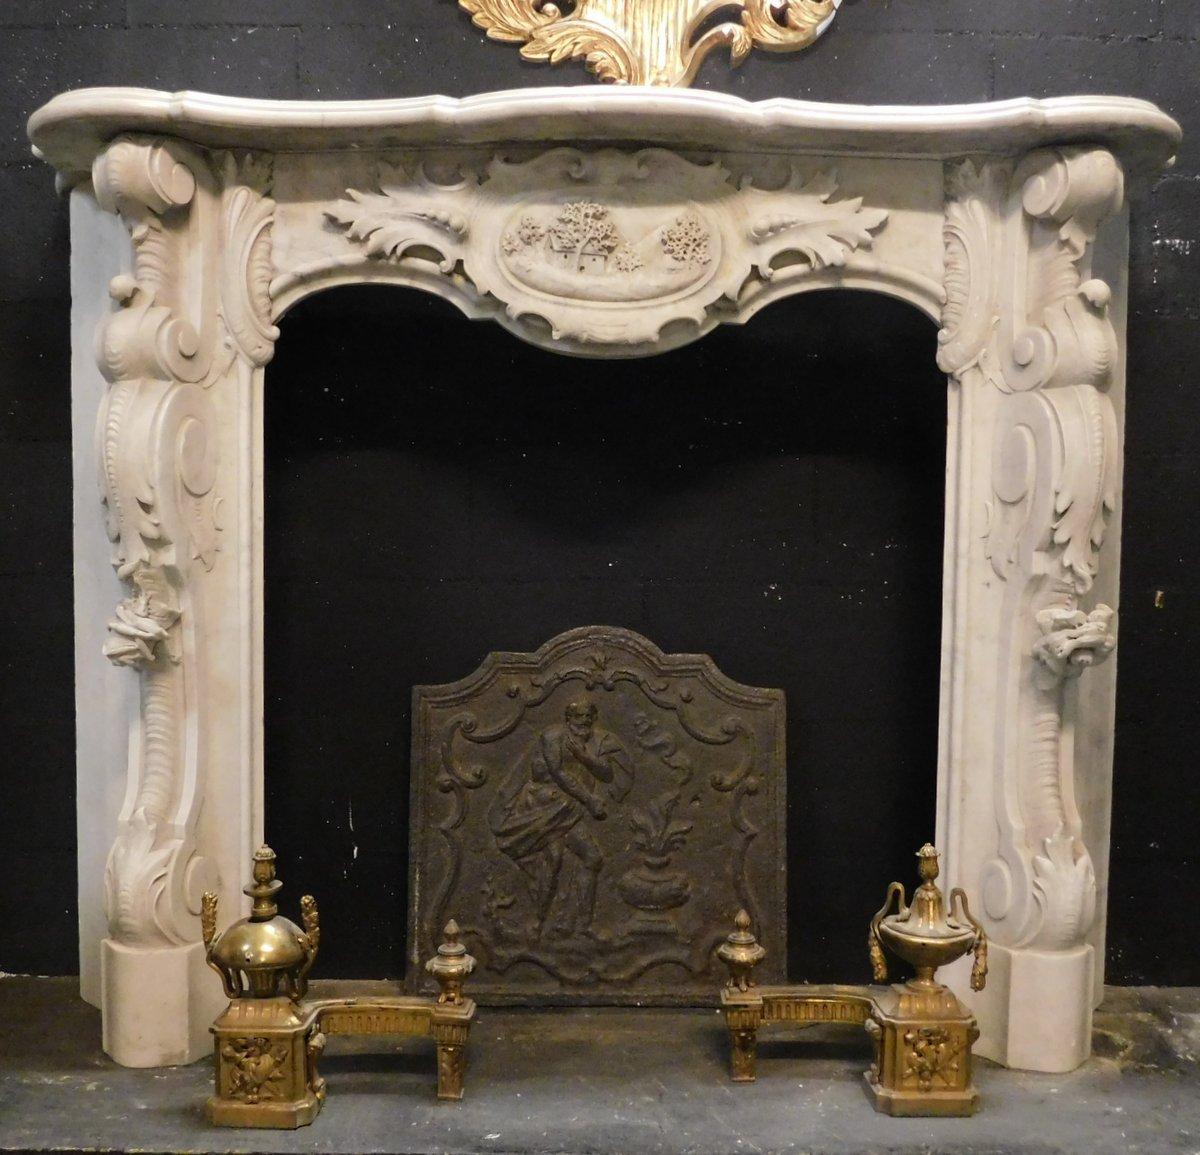 Hand-Carved Art Noveau Mantel Fireplace in White Carrara Marble, Early 1900s, Italy For Sale